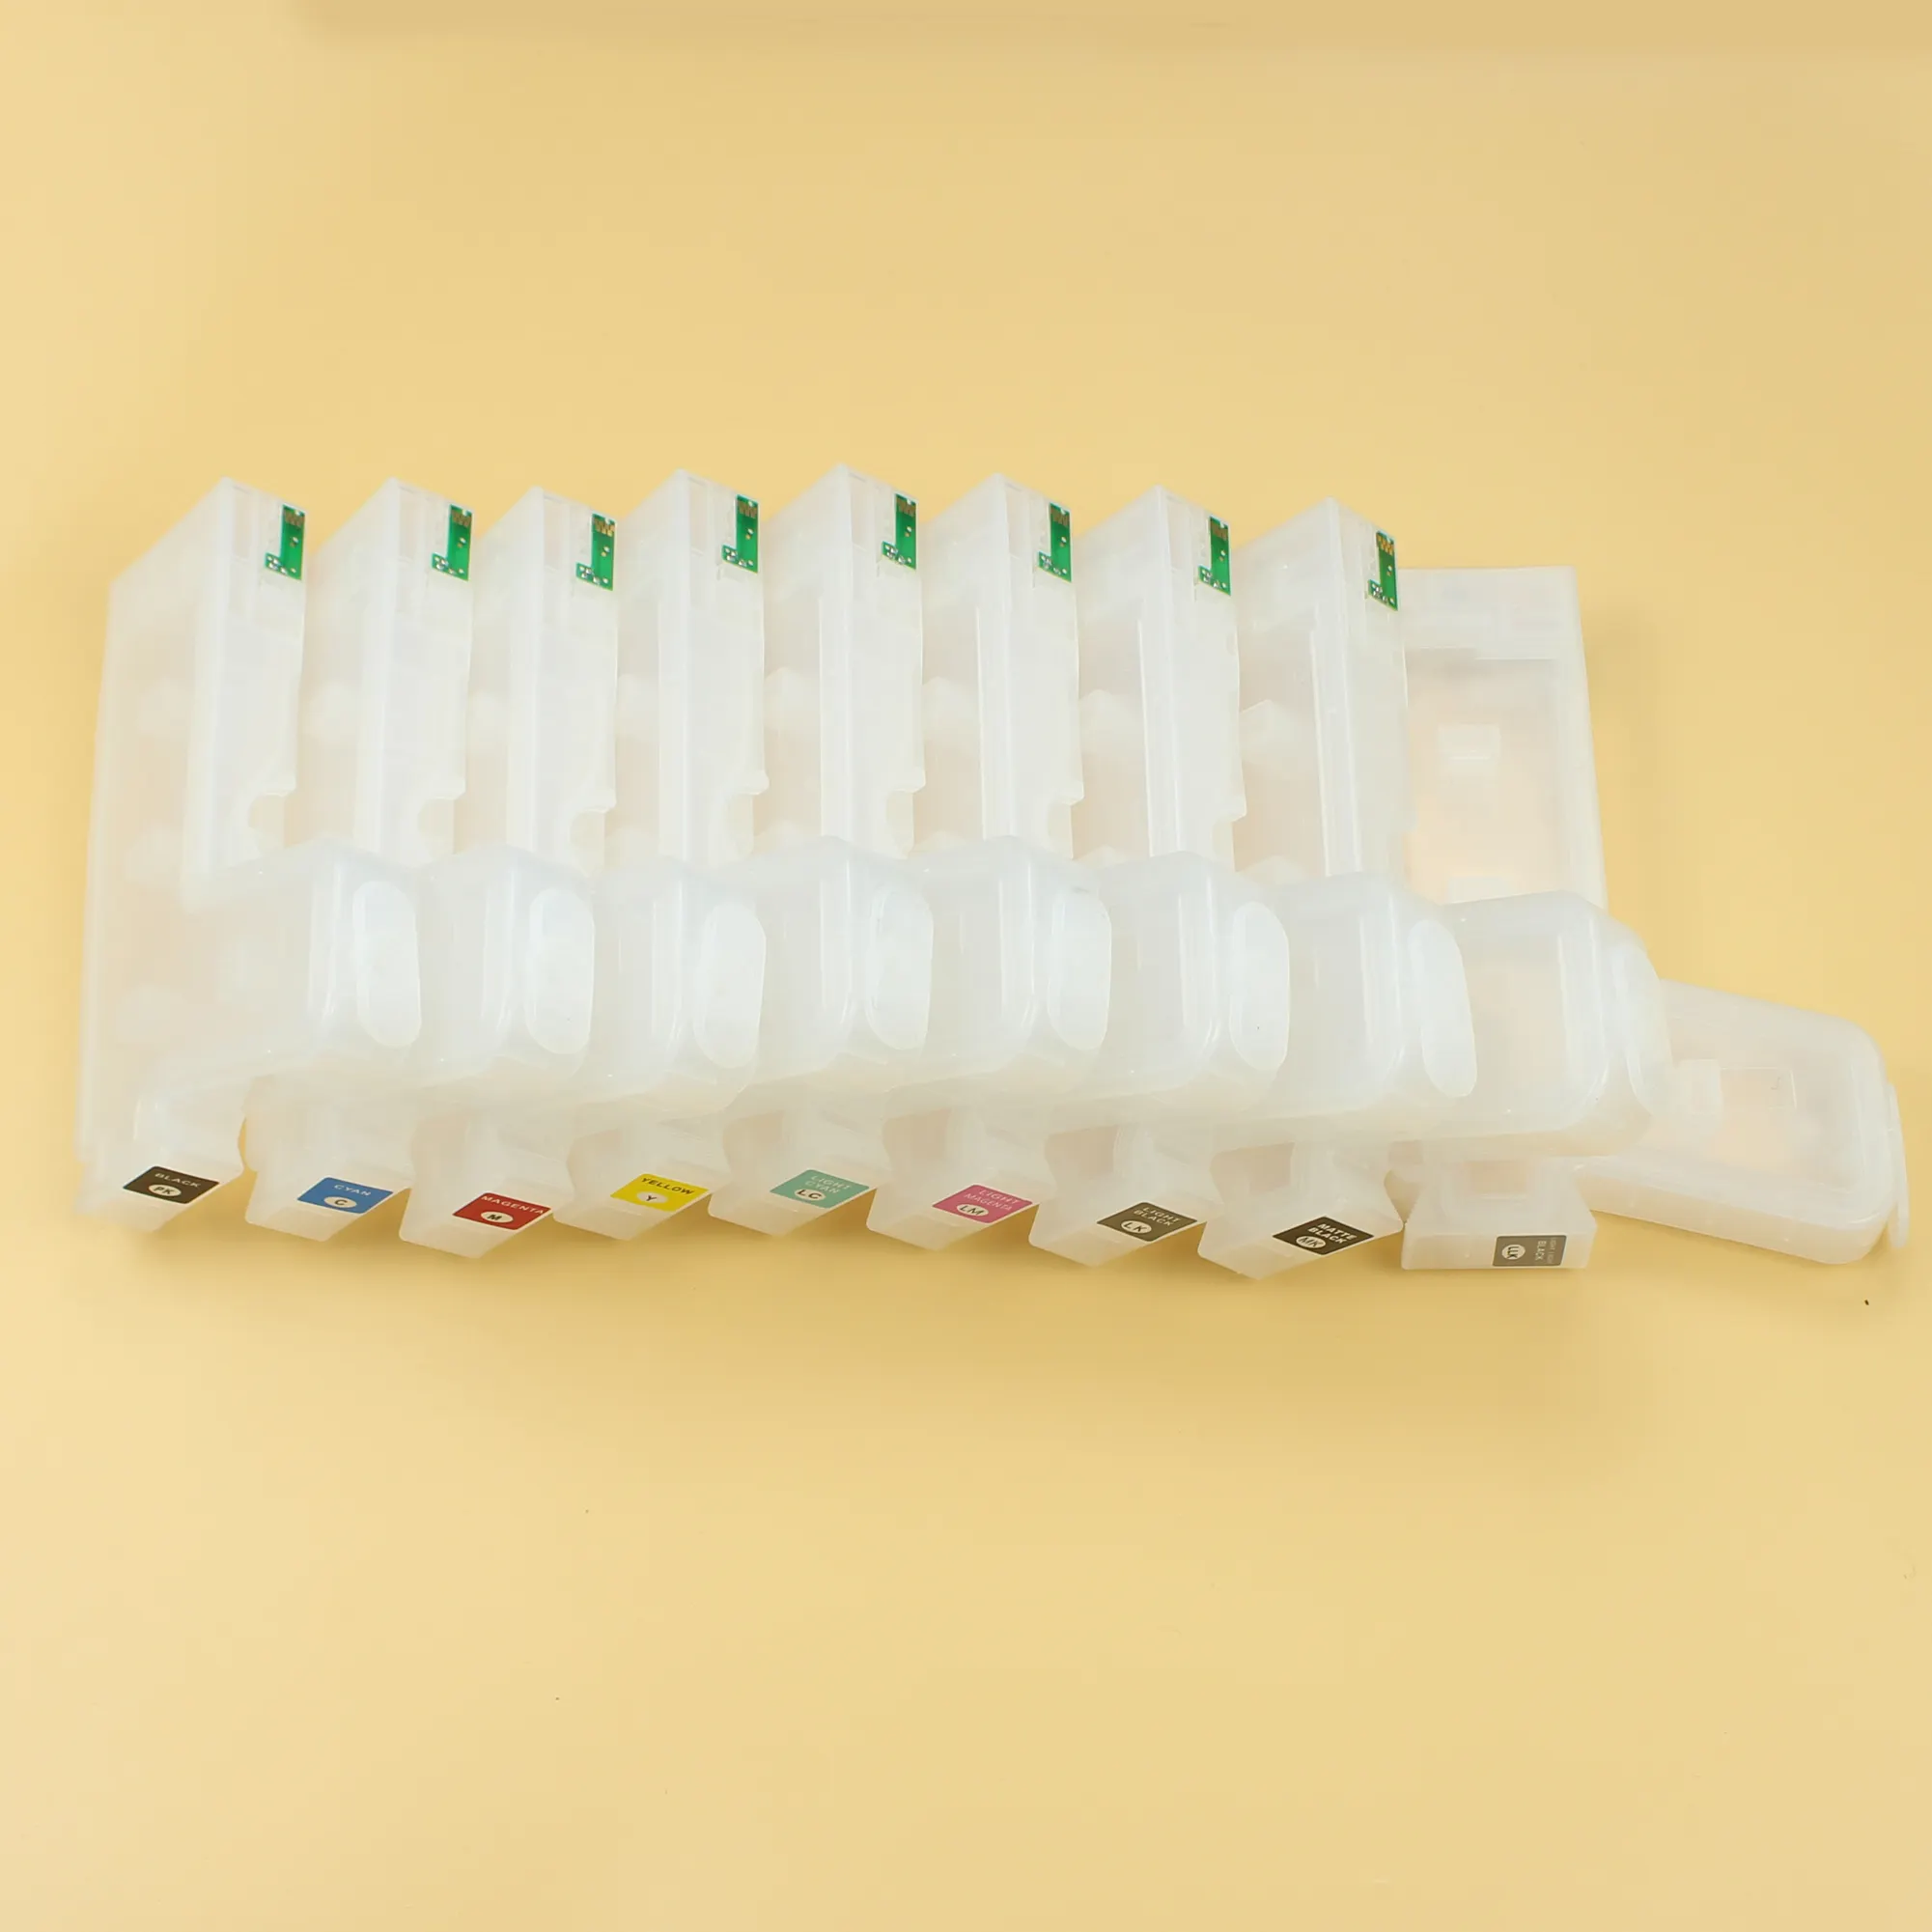 Free shipping 280ML T5801-T5809 refillable cartridges empty for epson 3800 3885 3880 3890 printer with sensors on high quality